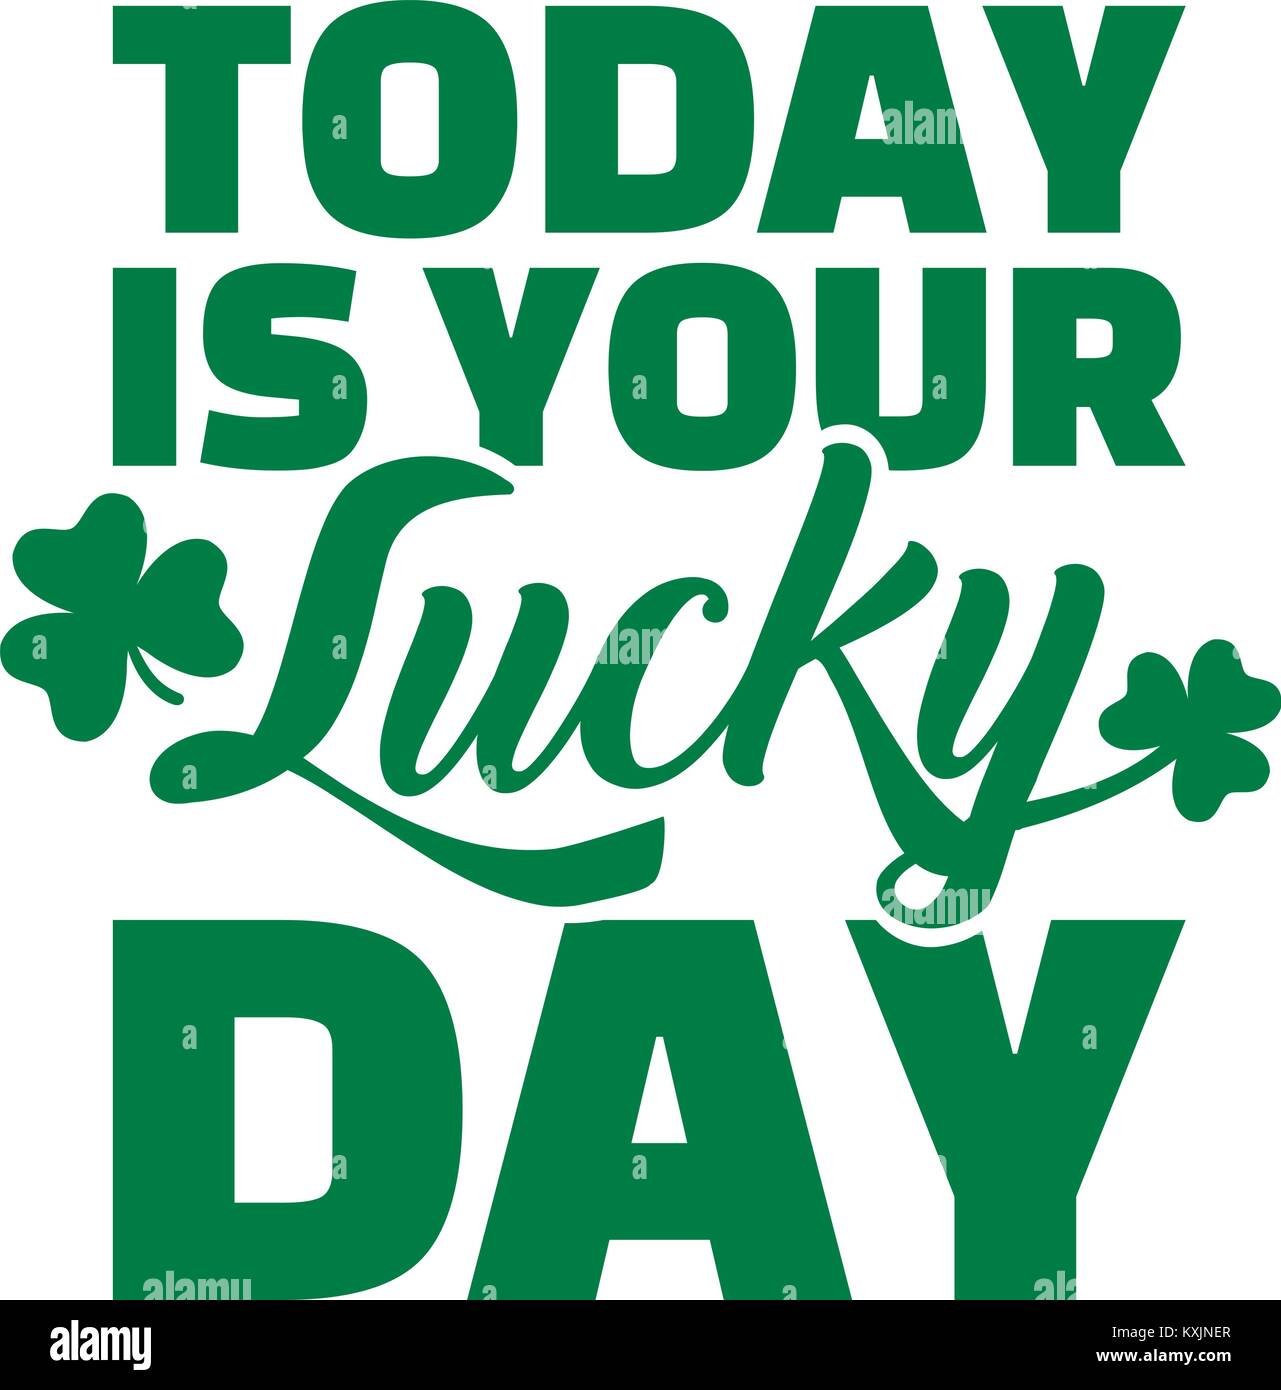 Best St. Patrick's Day Clipart - Royalty-Free Stock